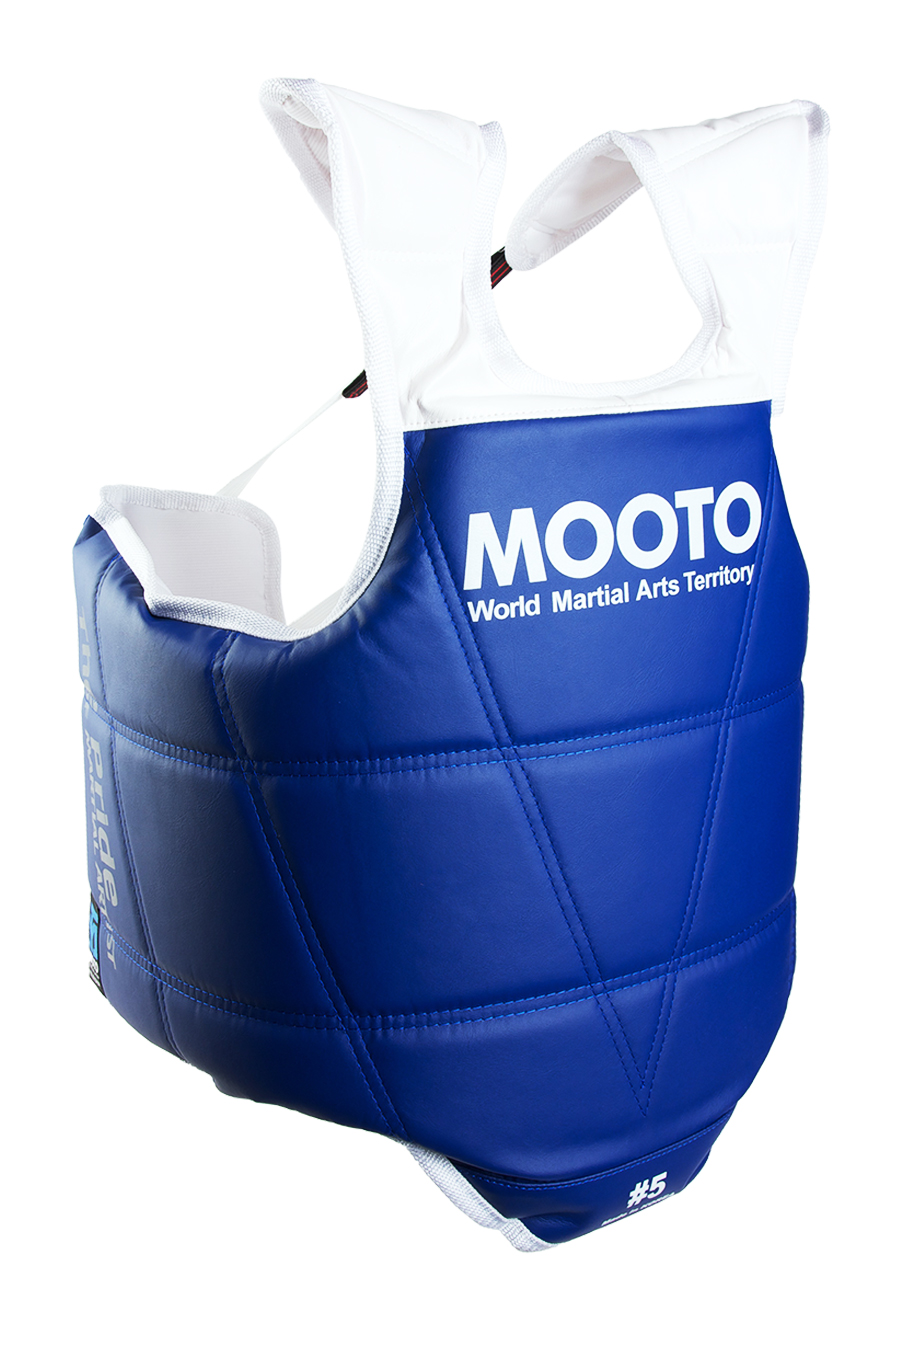 MOOTO TaeKwonDo Chest Guard Set WTF/KTA Approved Protector Blue one + Red one 